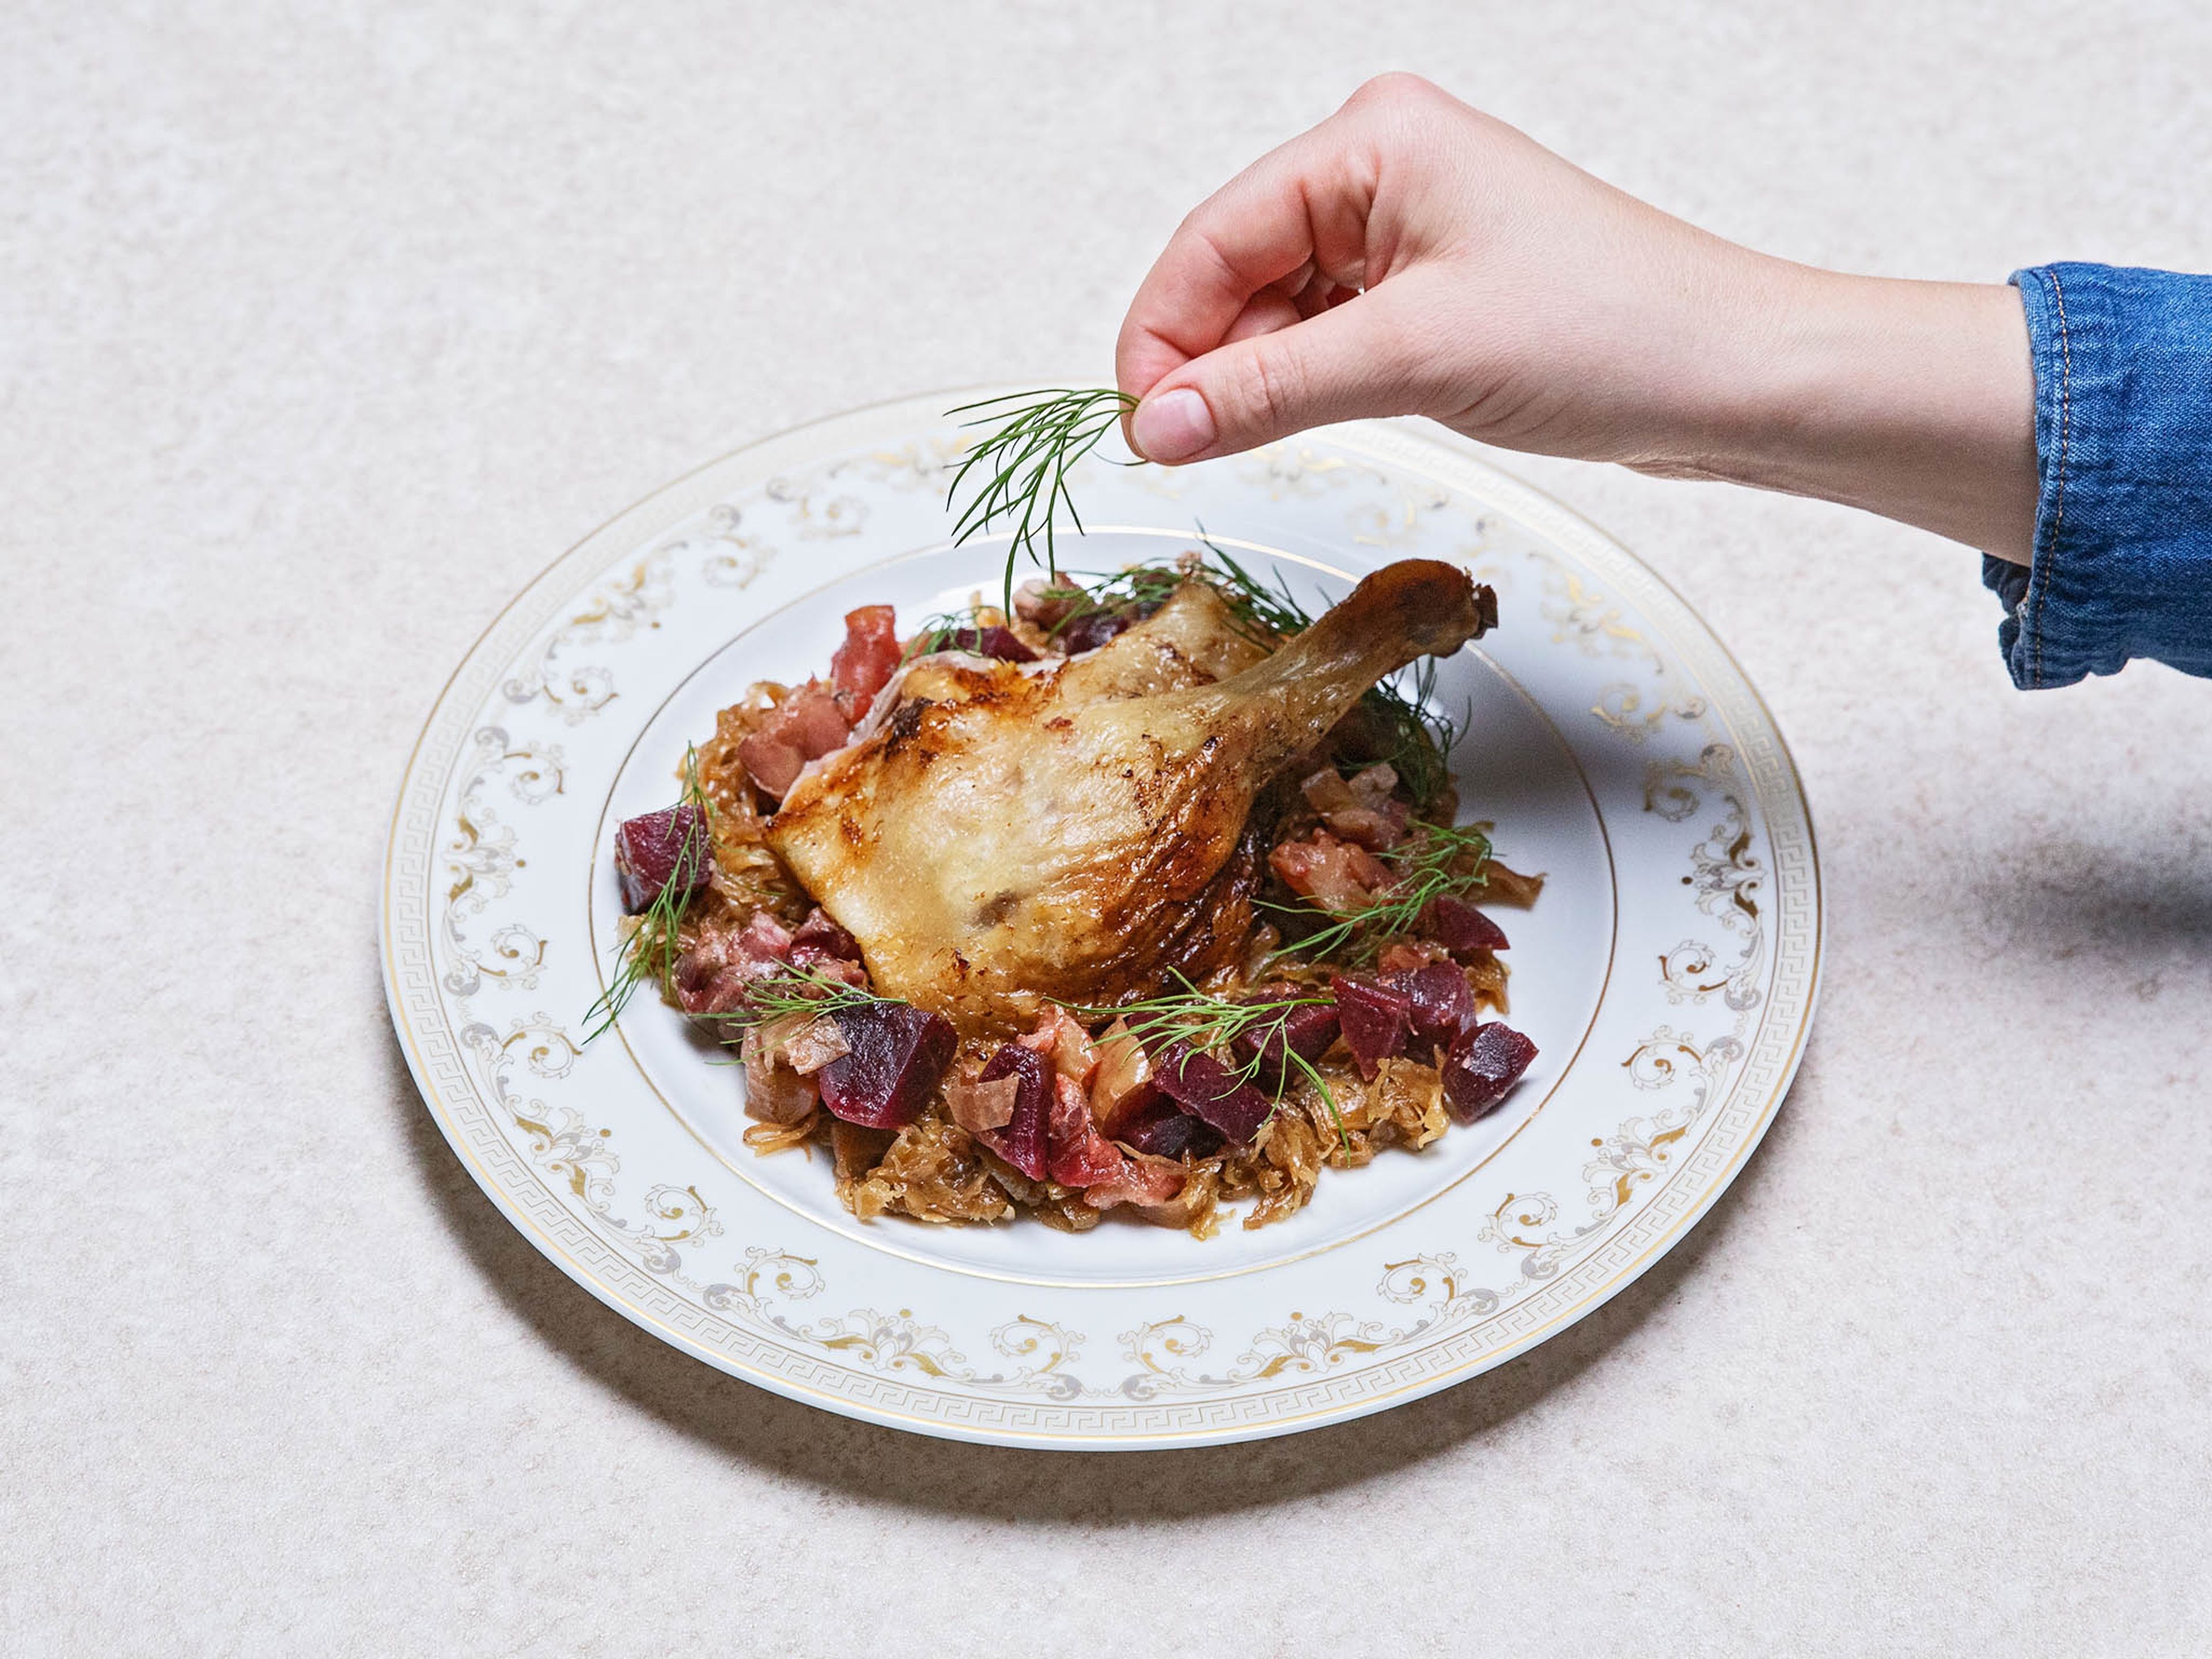 Carve the roast duck for serving. Enjoy with sauerkraut, apple-beet stuffing, and dill. Enjoy!